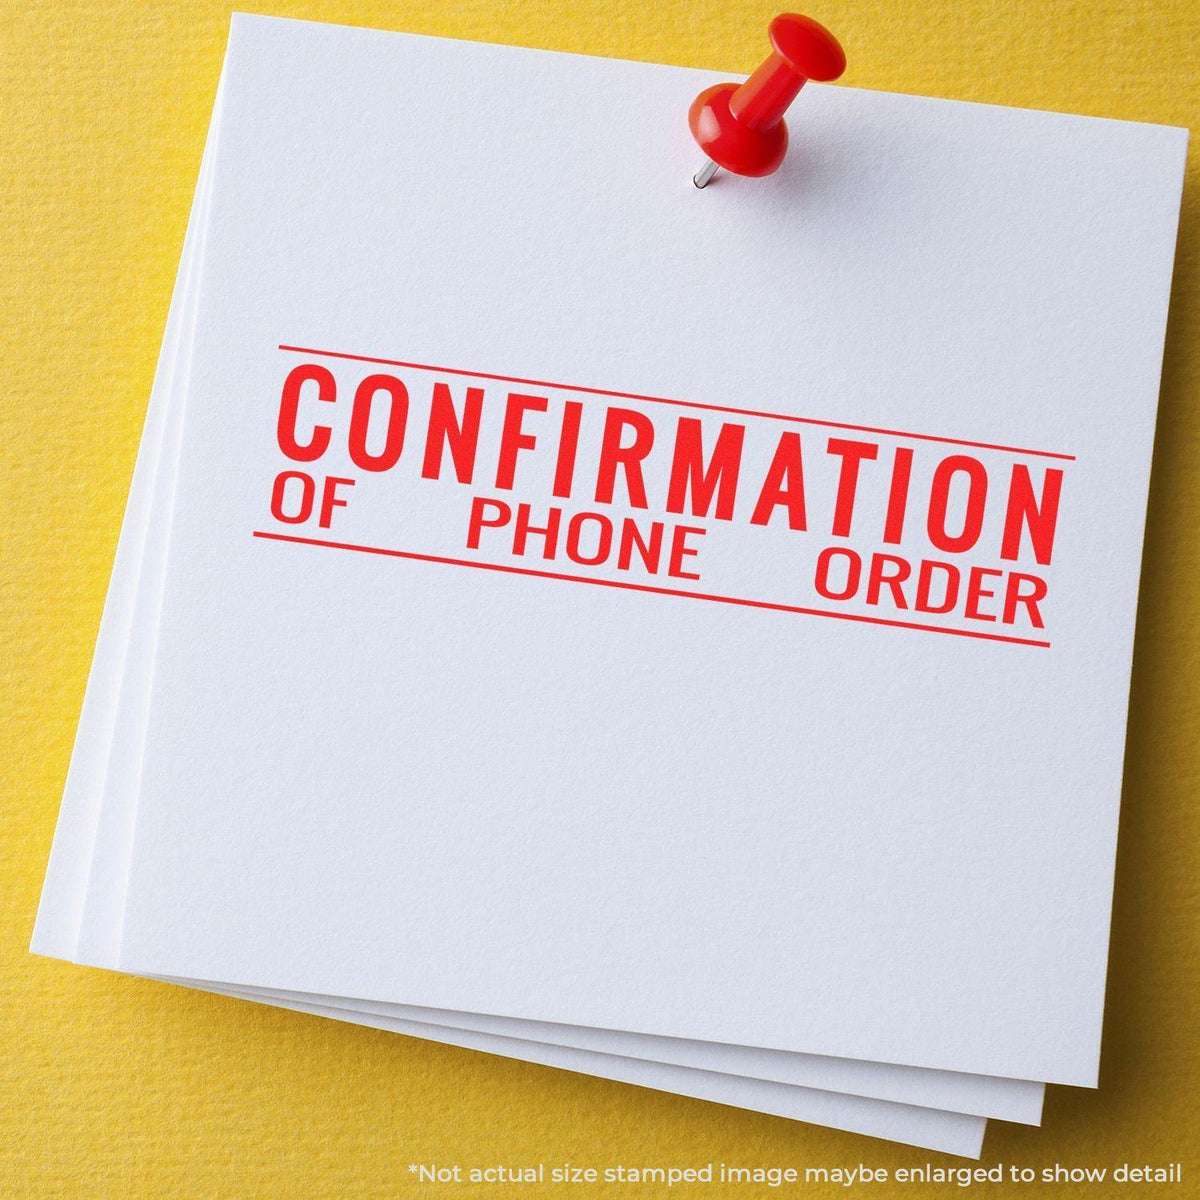 Large Self-Inking Confirmation of Phone Order Stamp In Use Photo